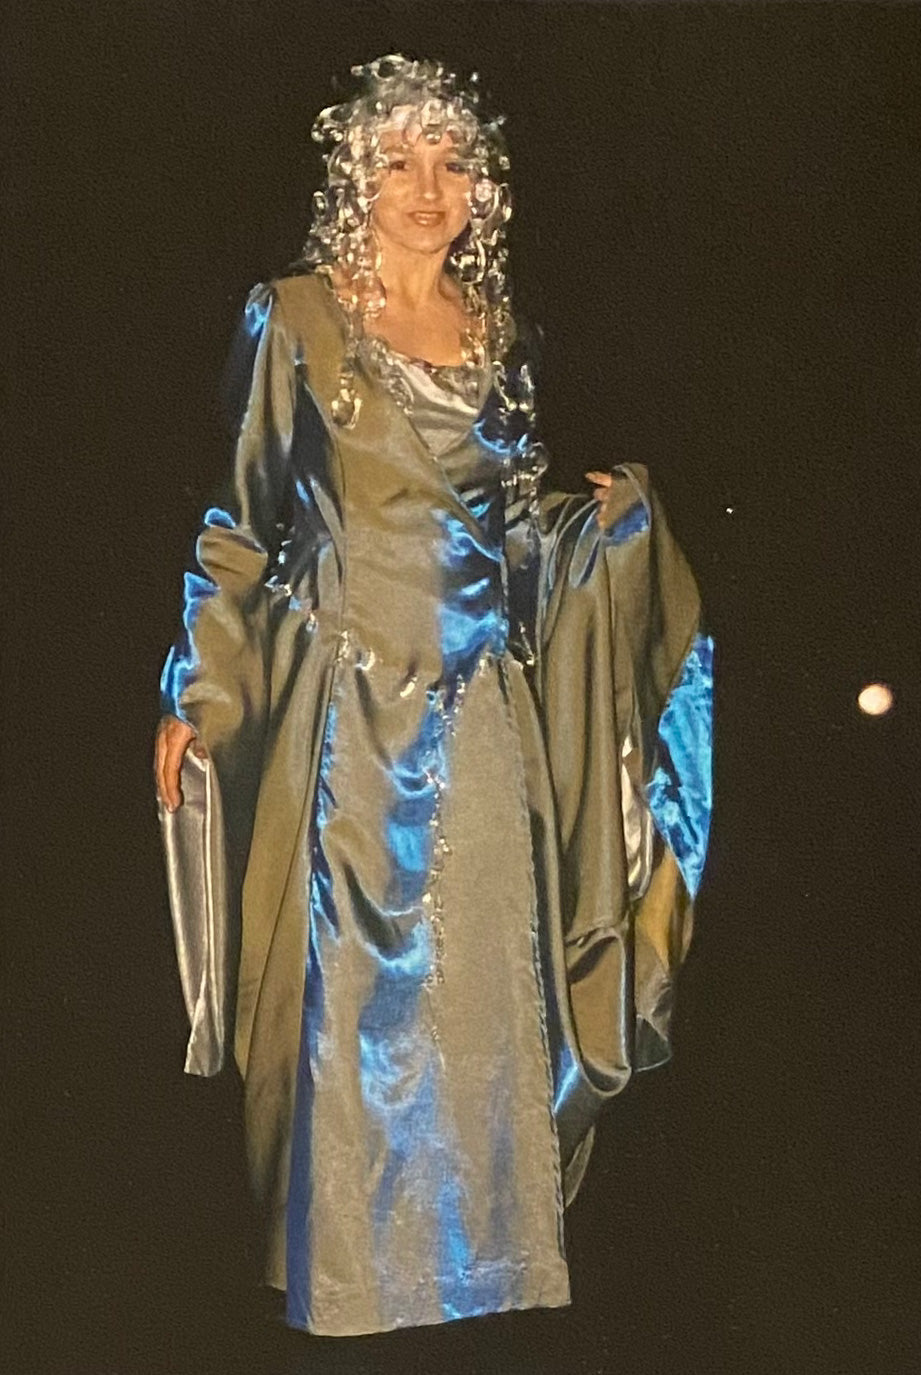 Jenny Mørk as a glassartist in an art performance in a fairy like costume in silver blue with a wig made of glass